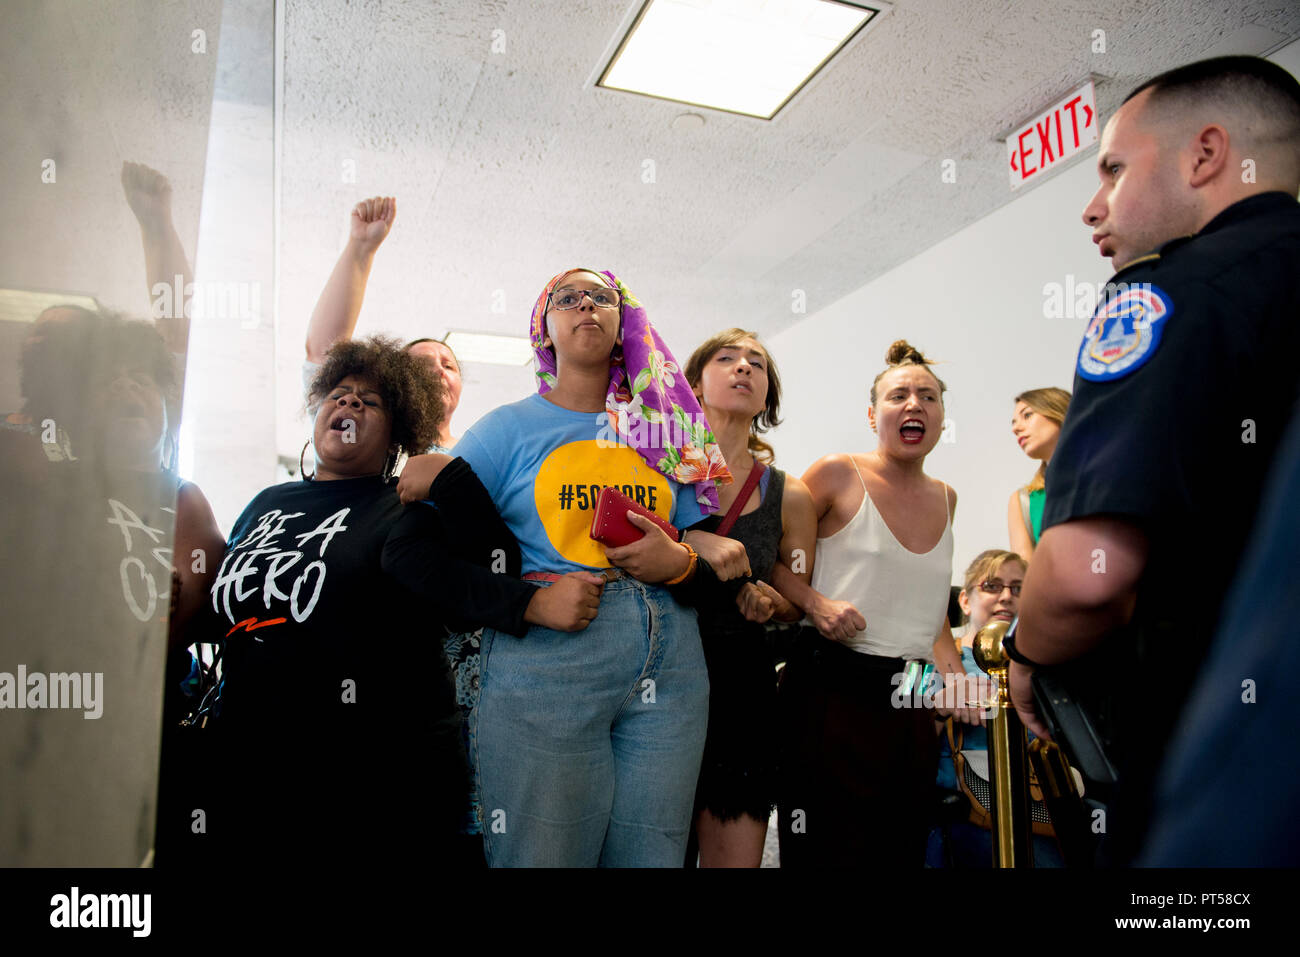 Washington, District of Columbia, USA. 6th Sep, 2018. Protestors disrupt U.S. Supreme Court nominee Judge Brett Kavanaugh's confirmation hearing on Capitol Hill. Kavanaugh was nominated by U.S. President Donald Trump to fill the vacancy on the court left by retiring Justice Anthony Kennedy. Credit: Erin Scott/ZUMA Wire/Alamy Live News Stock Photo